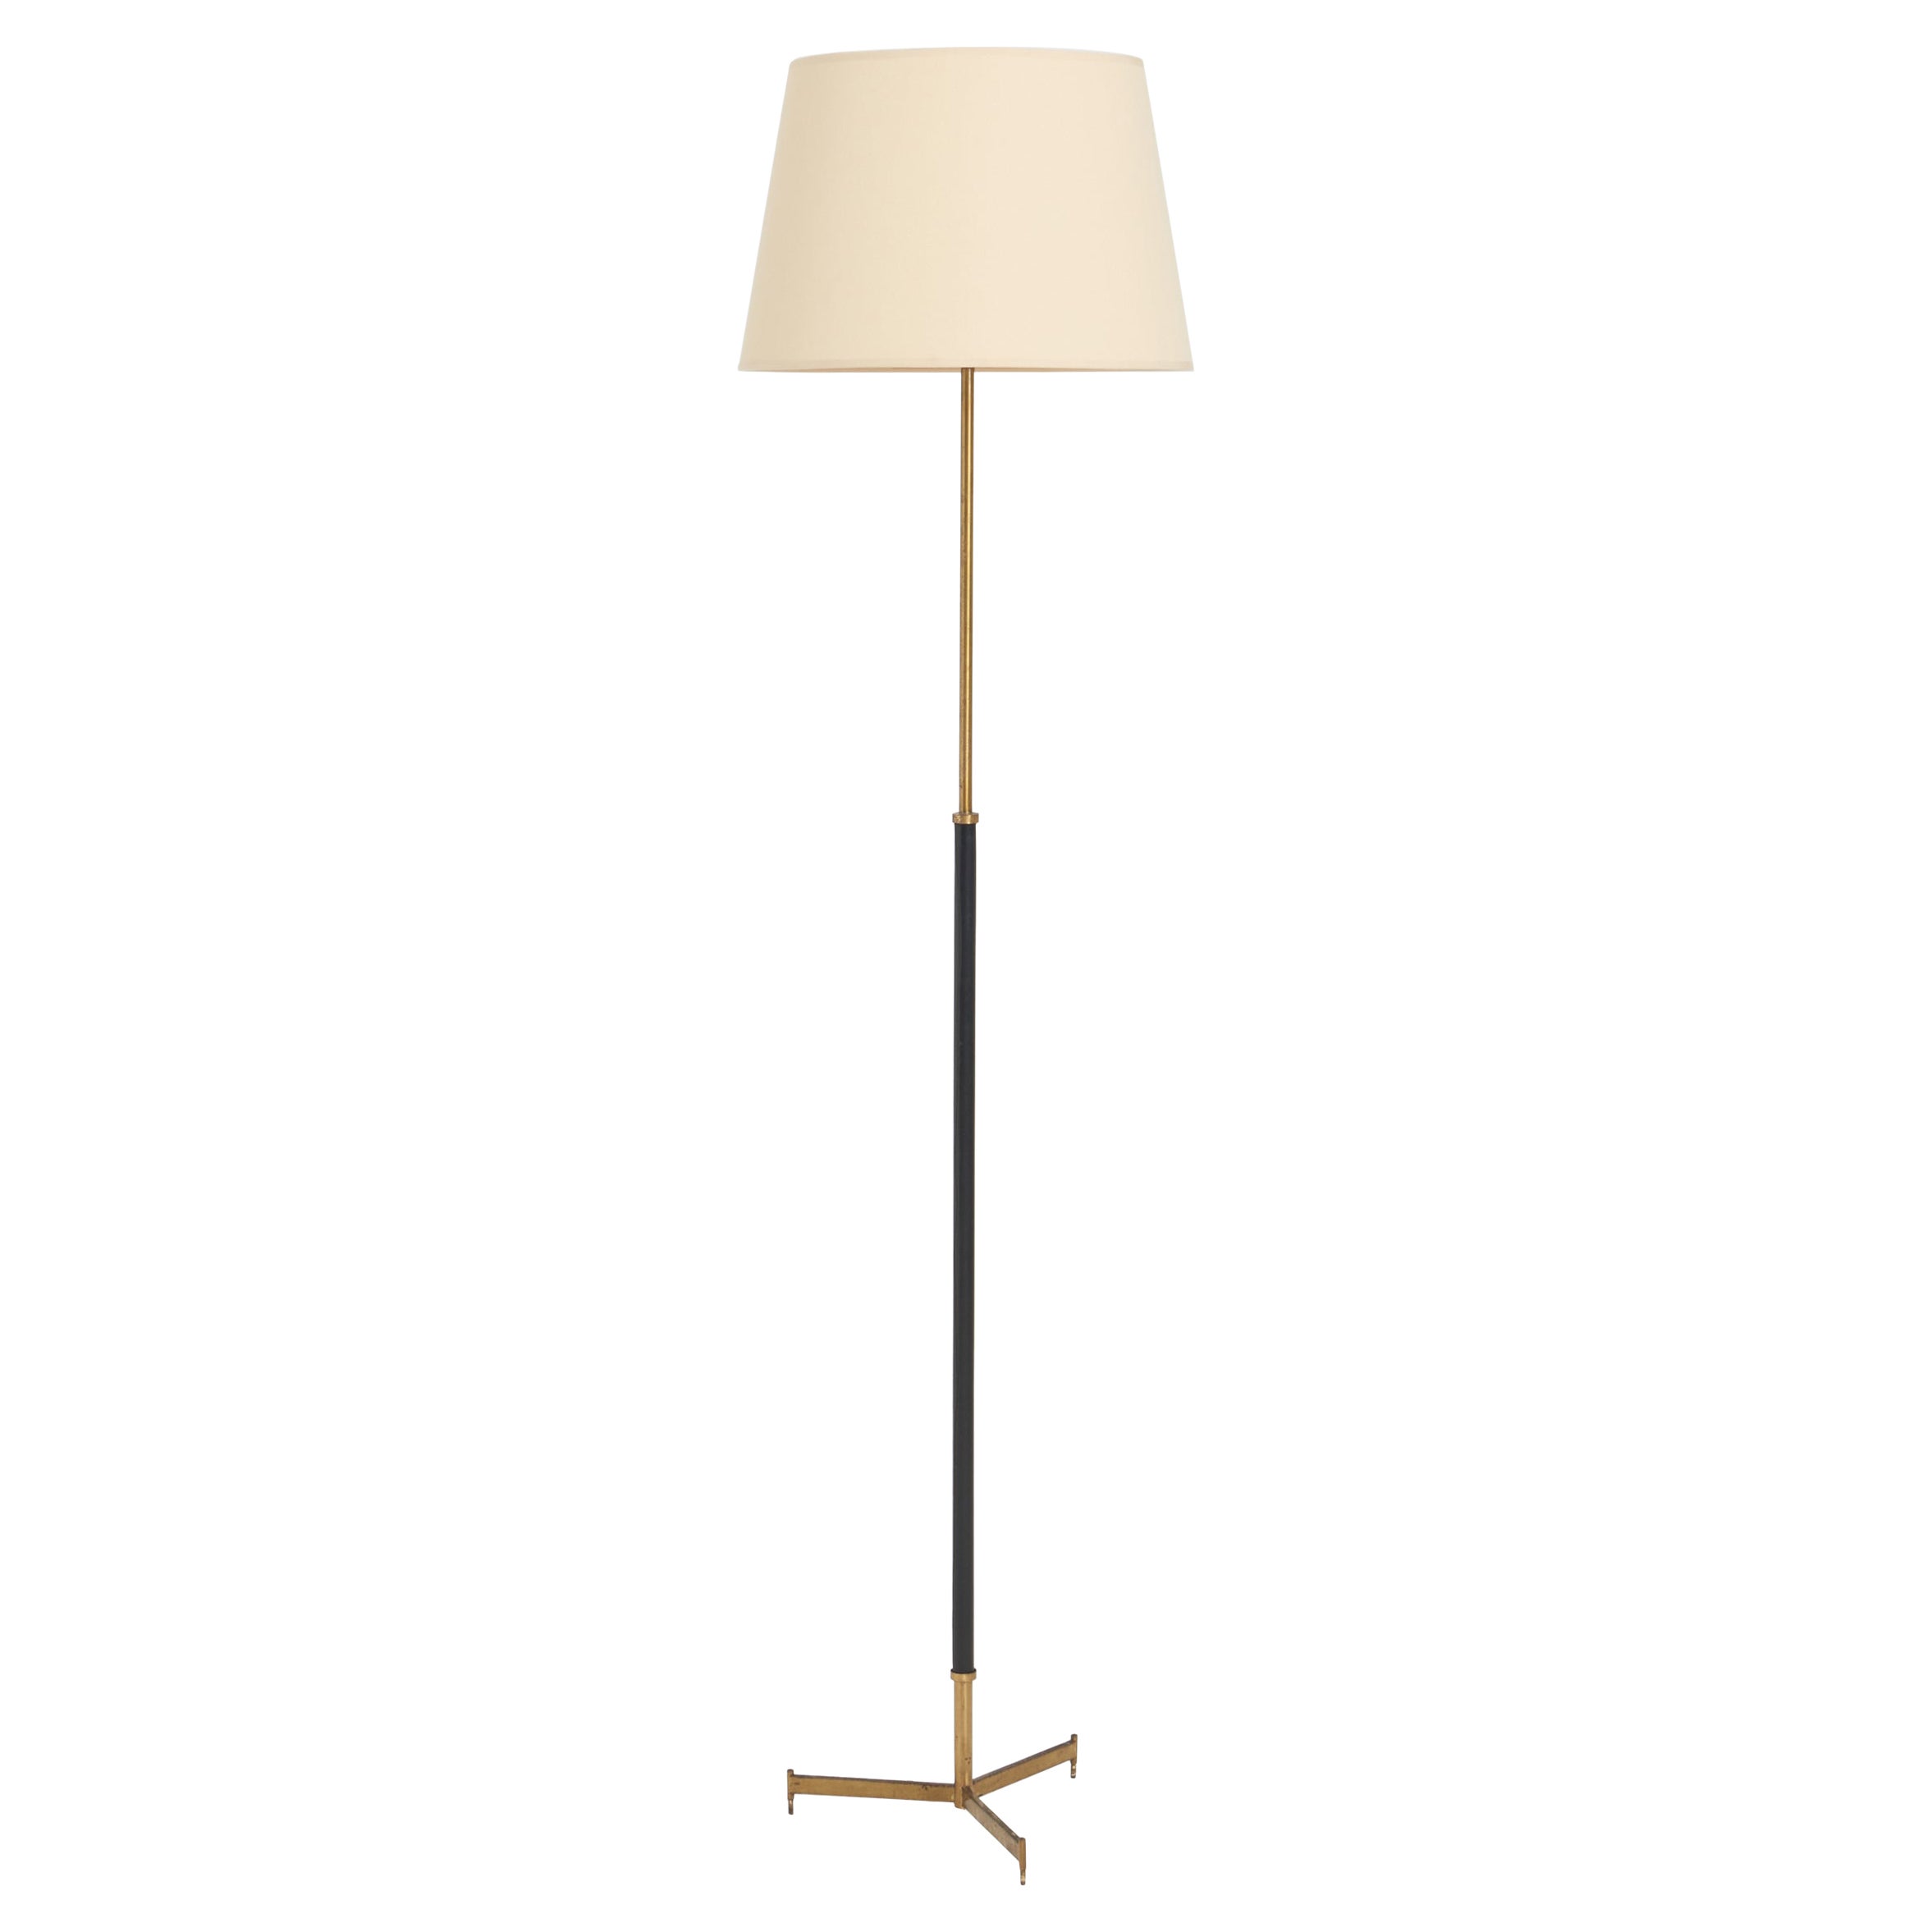 Midcentury Brass and Faux Black Leather Floor Lamp